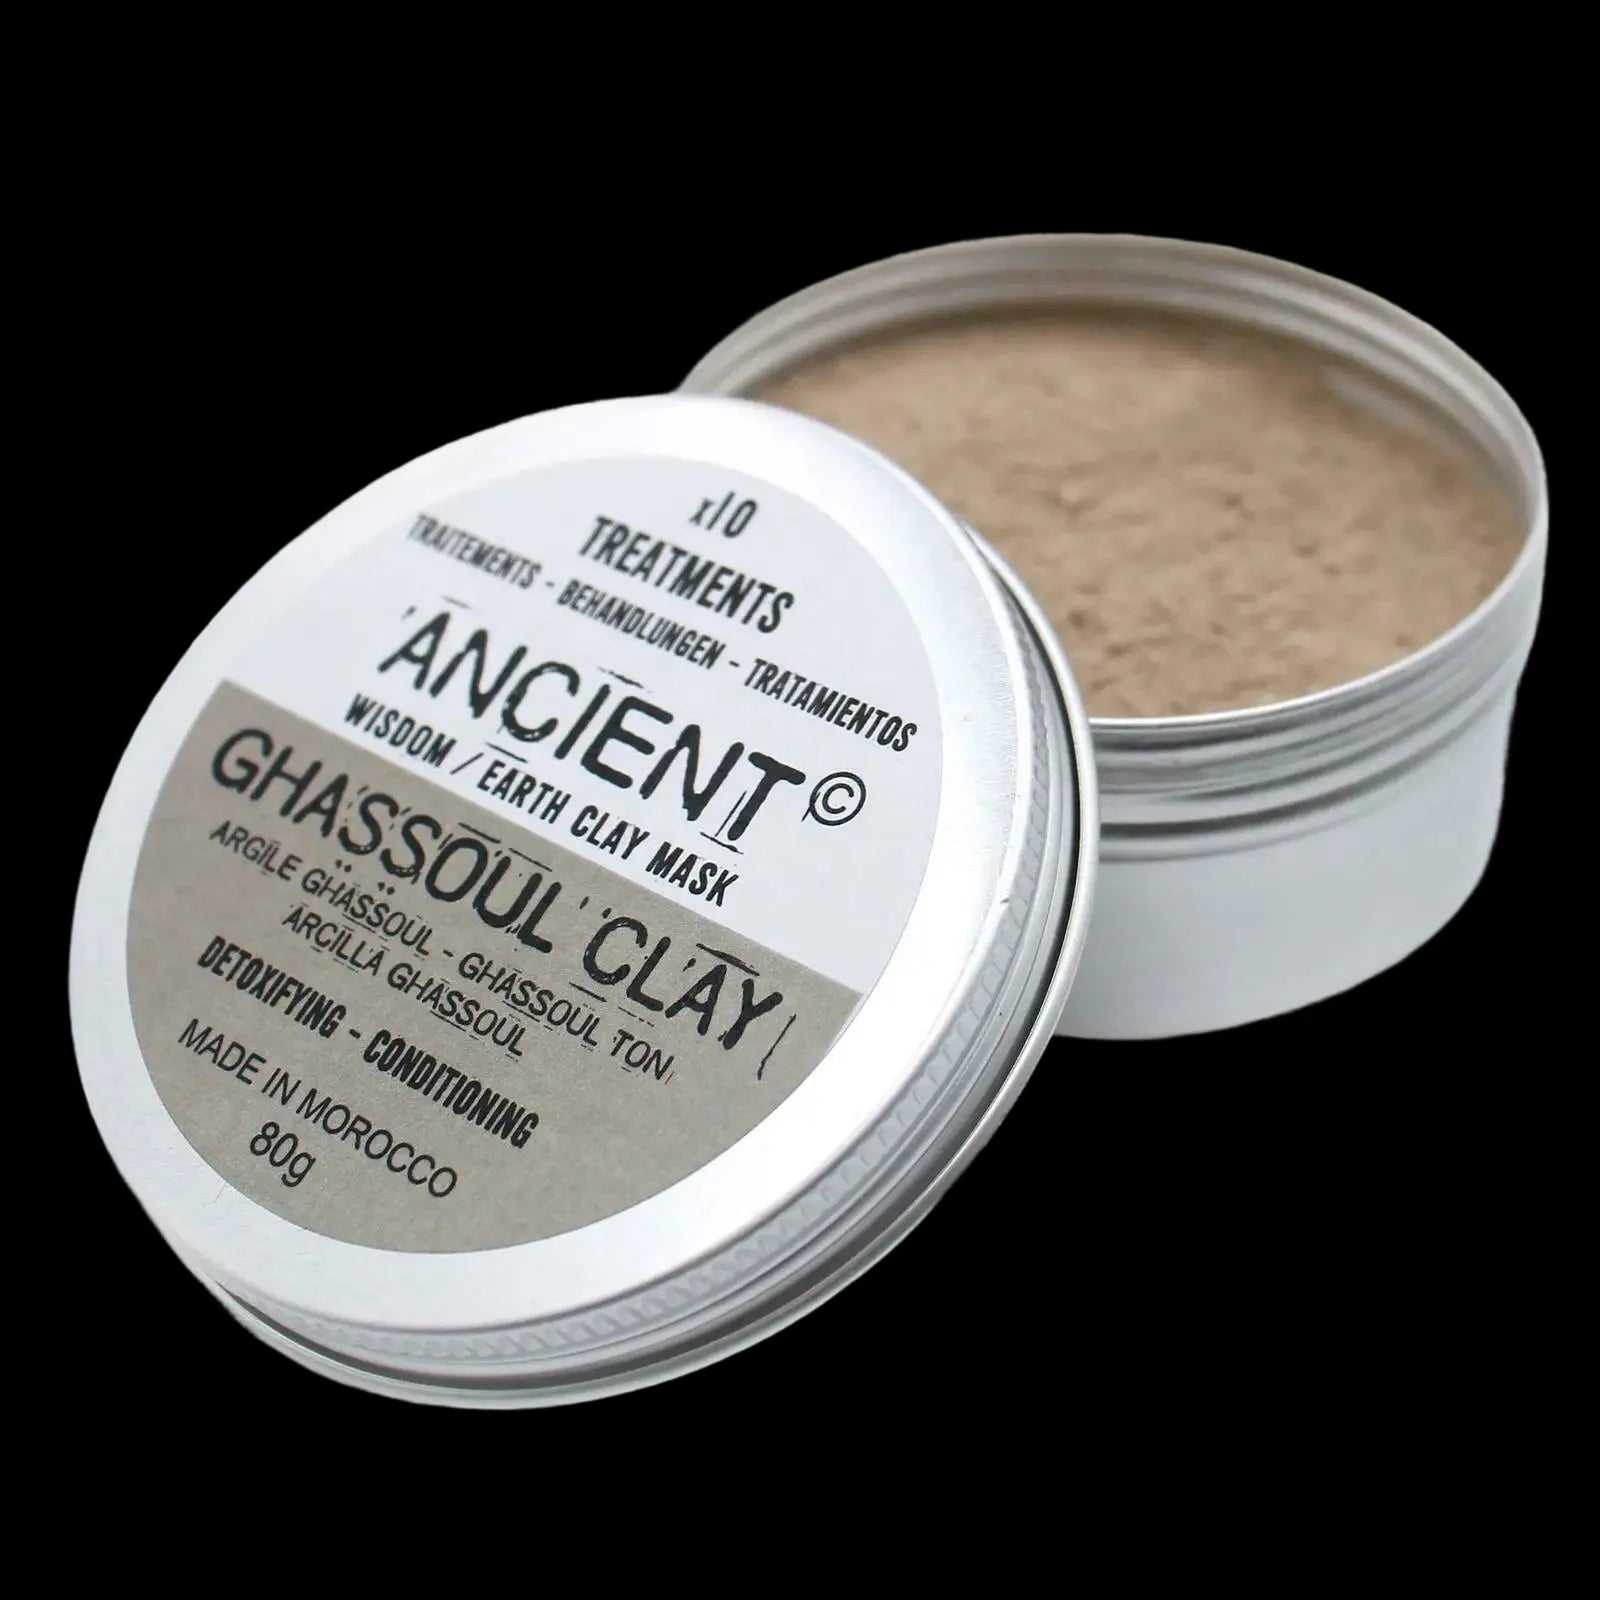 Ghassoul Clay Skin Mask 80g - Care Masks & Peels - Ancient